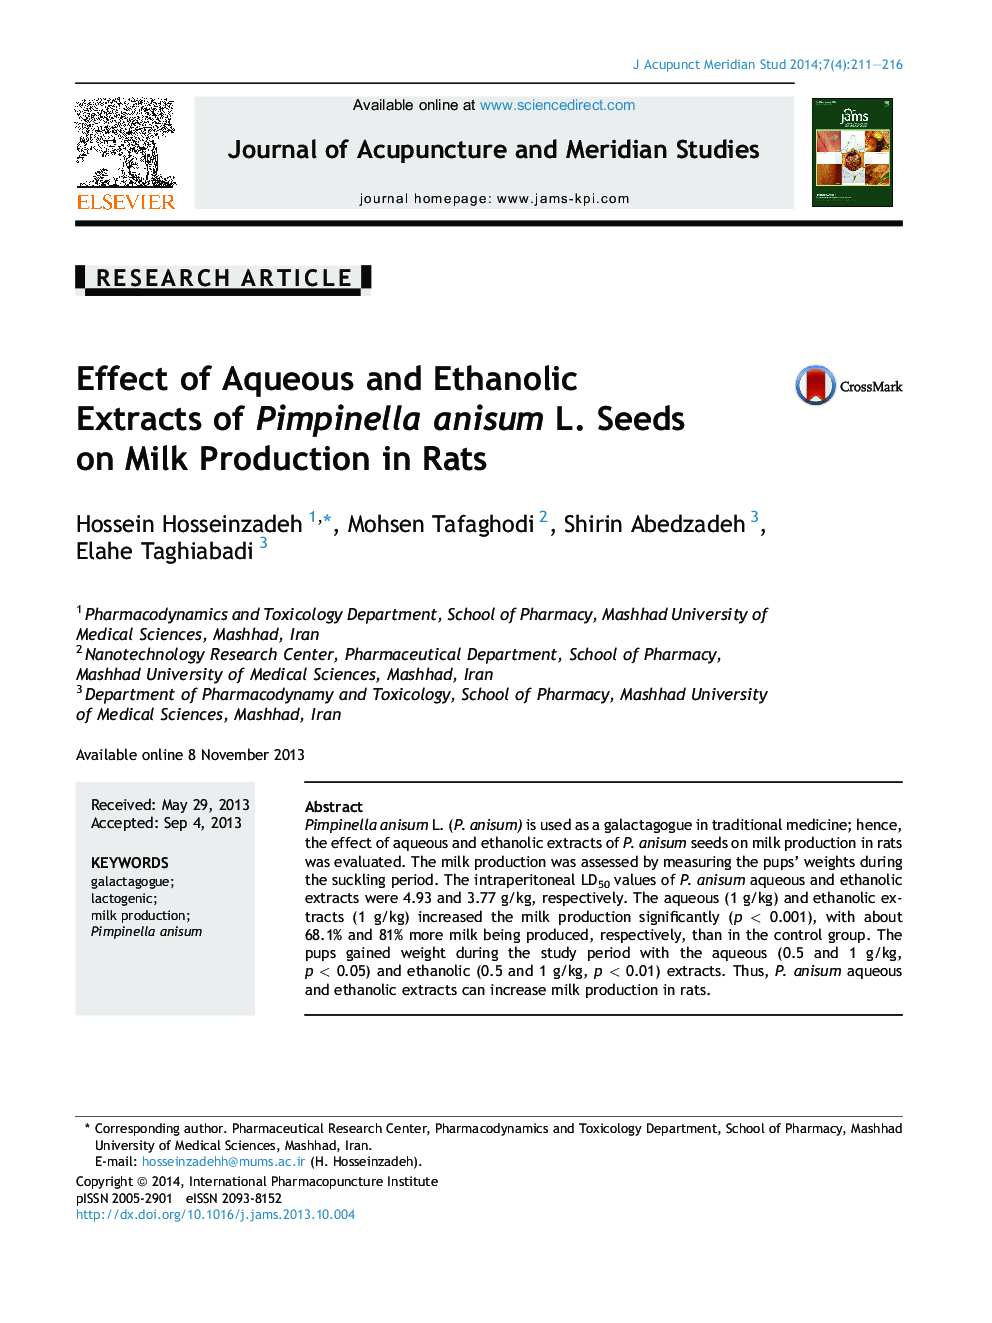 Effect of Aqueous and Ethanolic Extracts of Pimpinella anisum L. Seeds on Milk Production in Rats